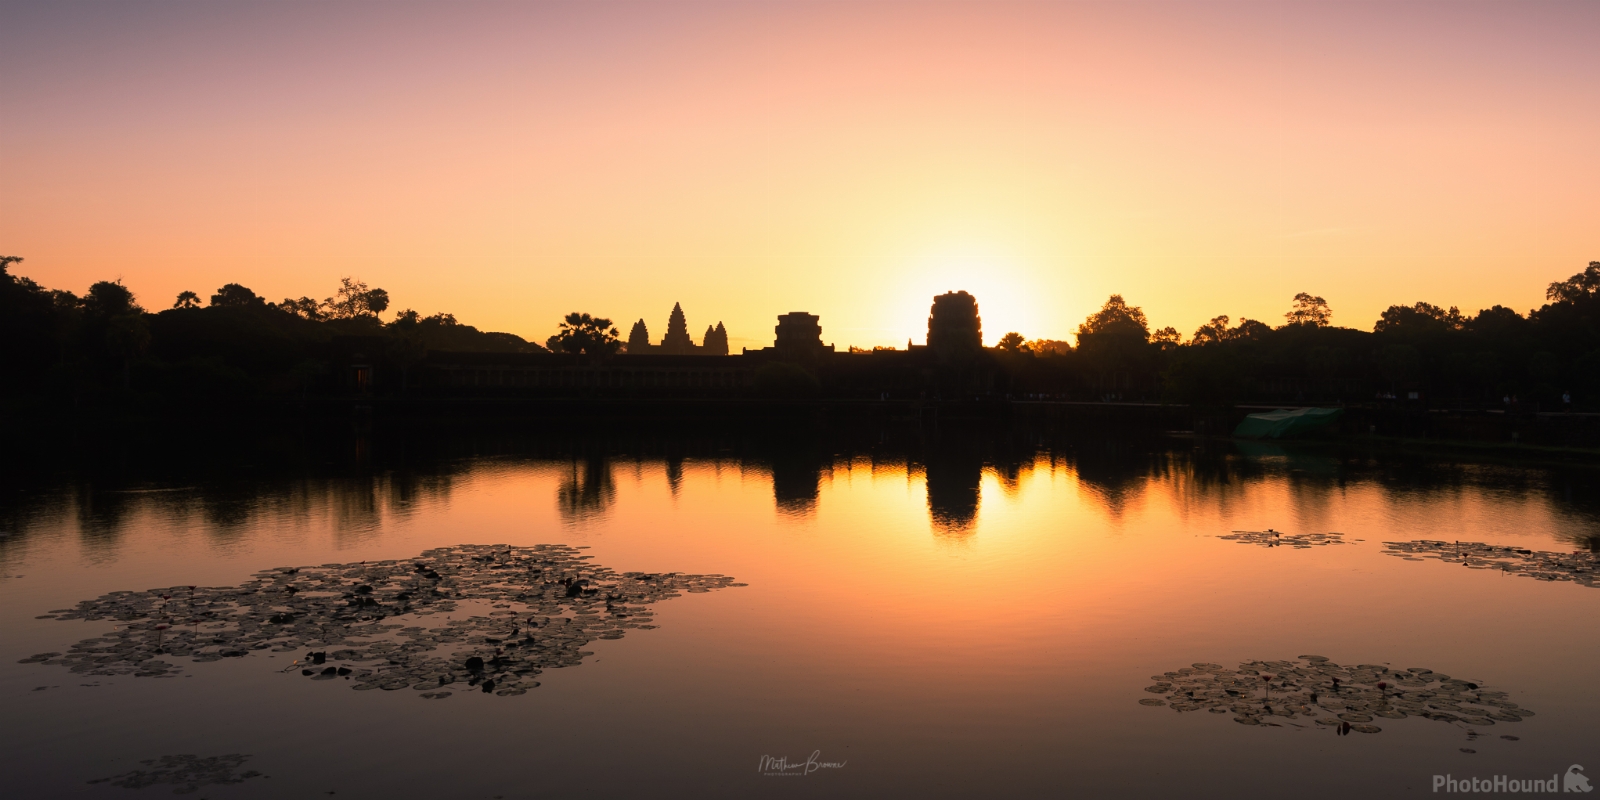 Image of Angkor Wat - Outer Moat by Mathew Browne